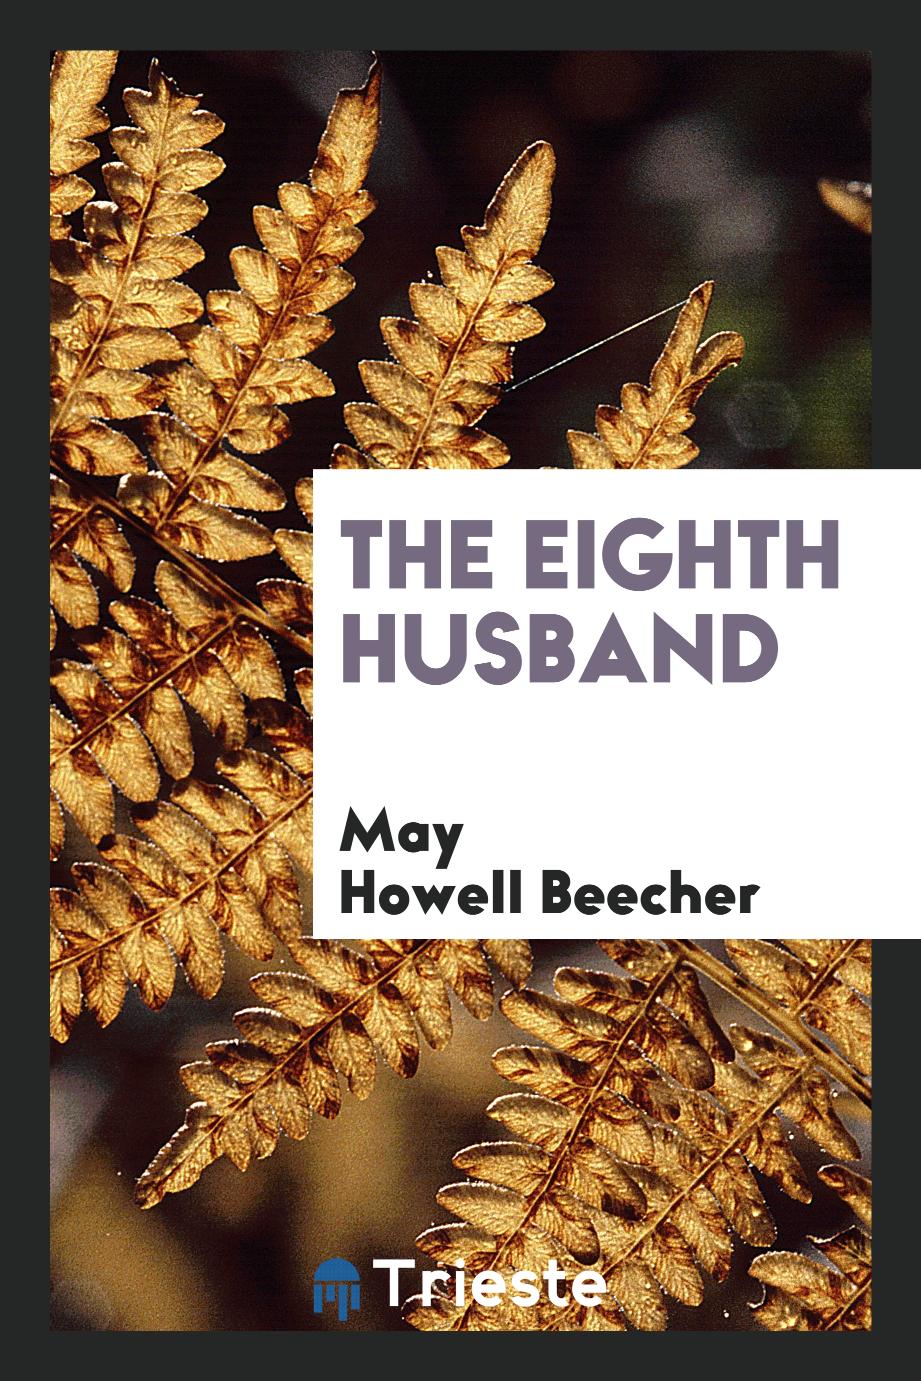 May Howell Beecher - The Eighth Husband